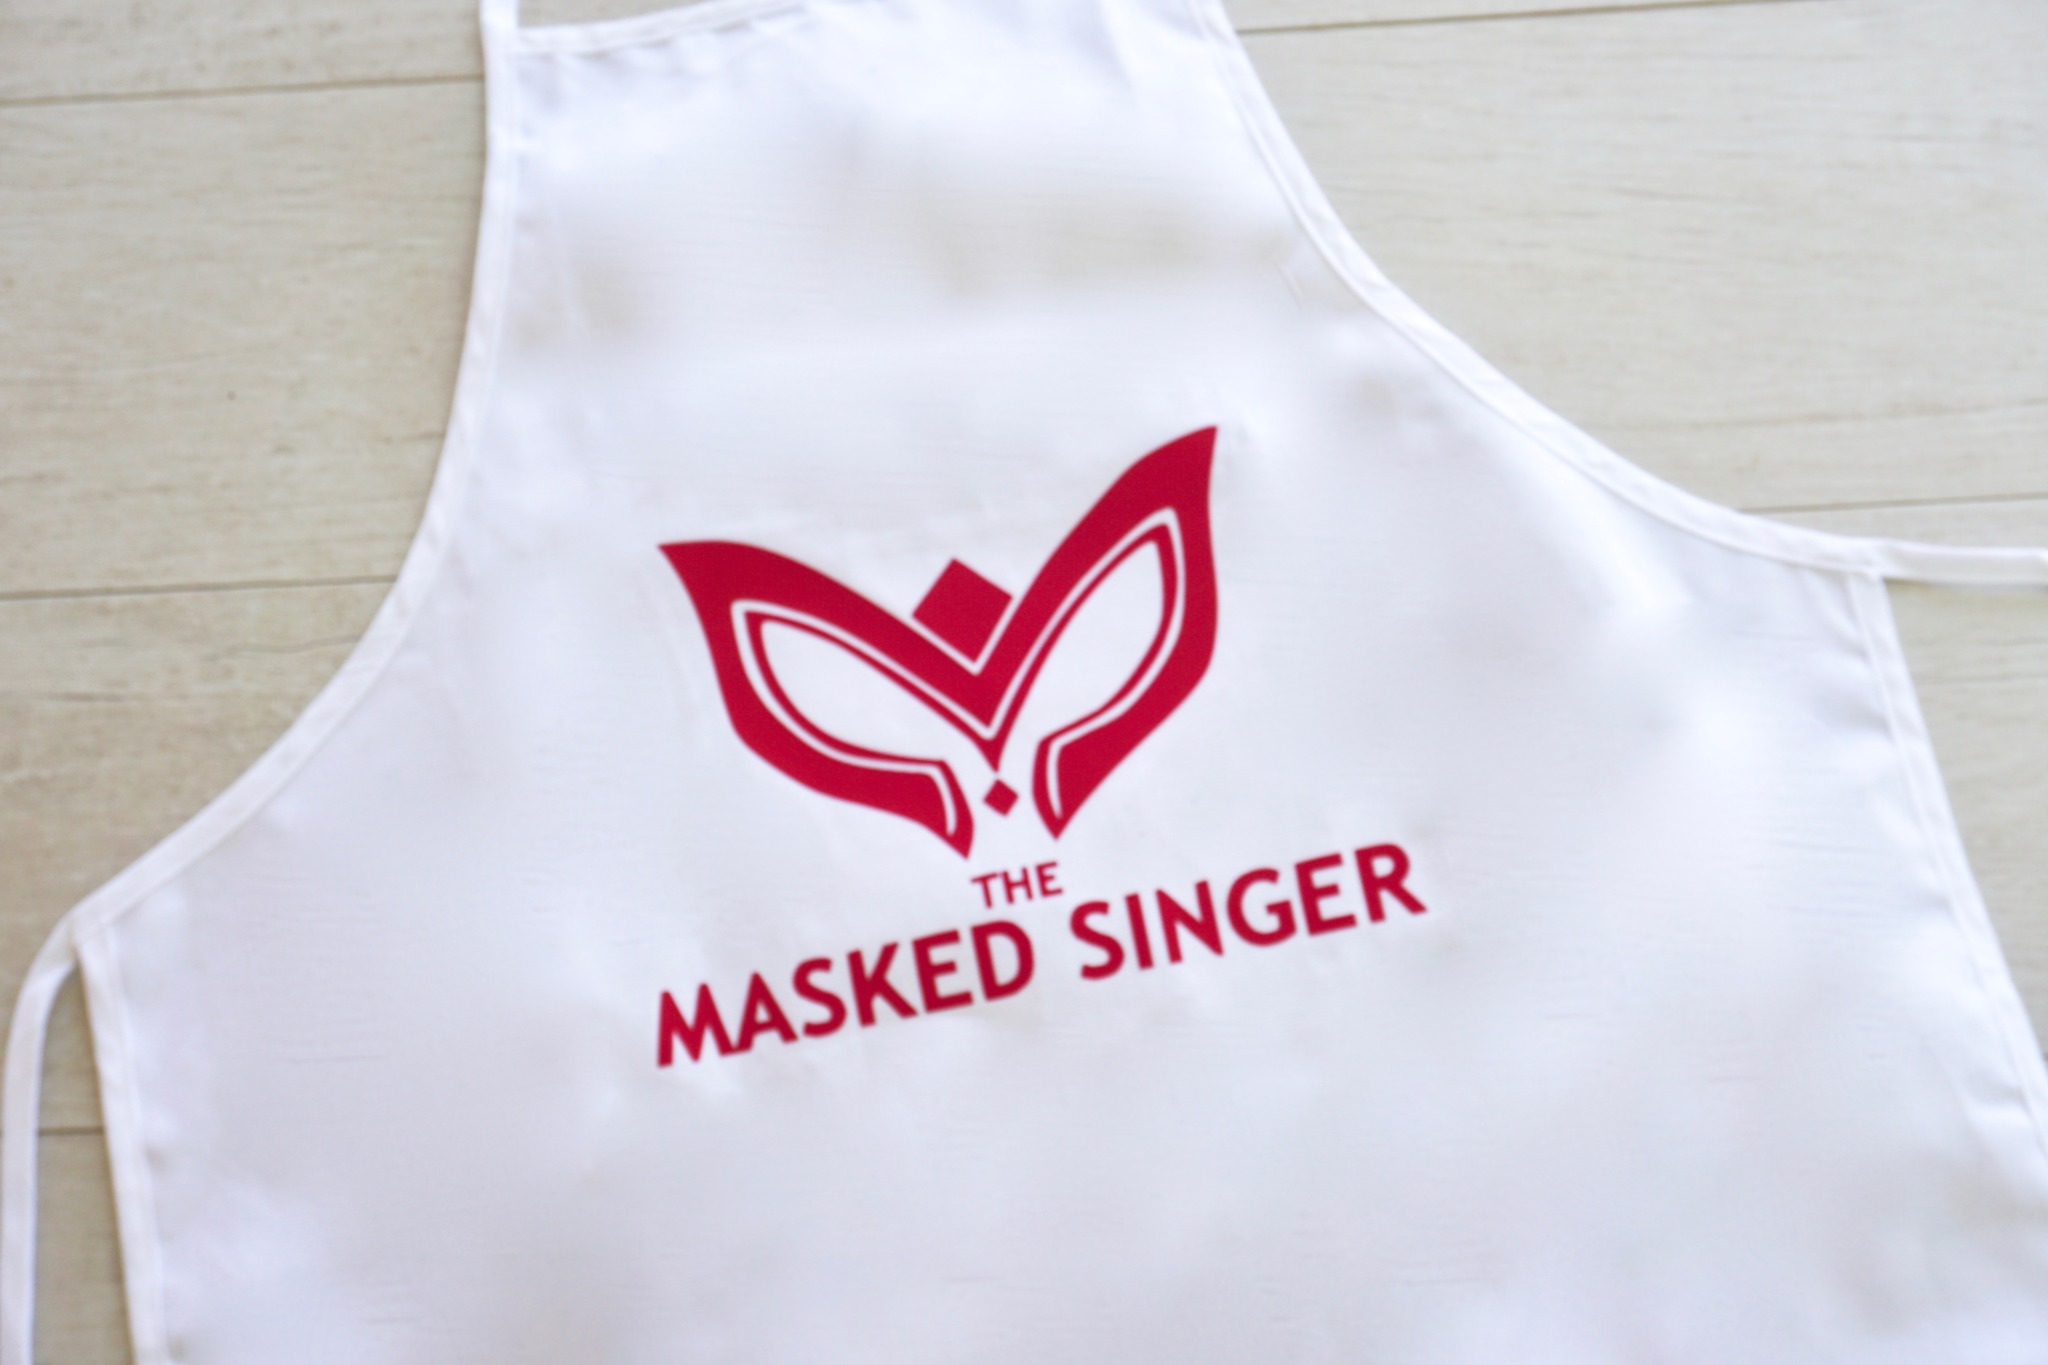 The Masked Singer Cricut template free download